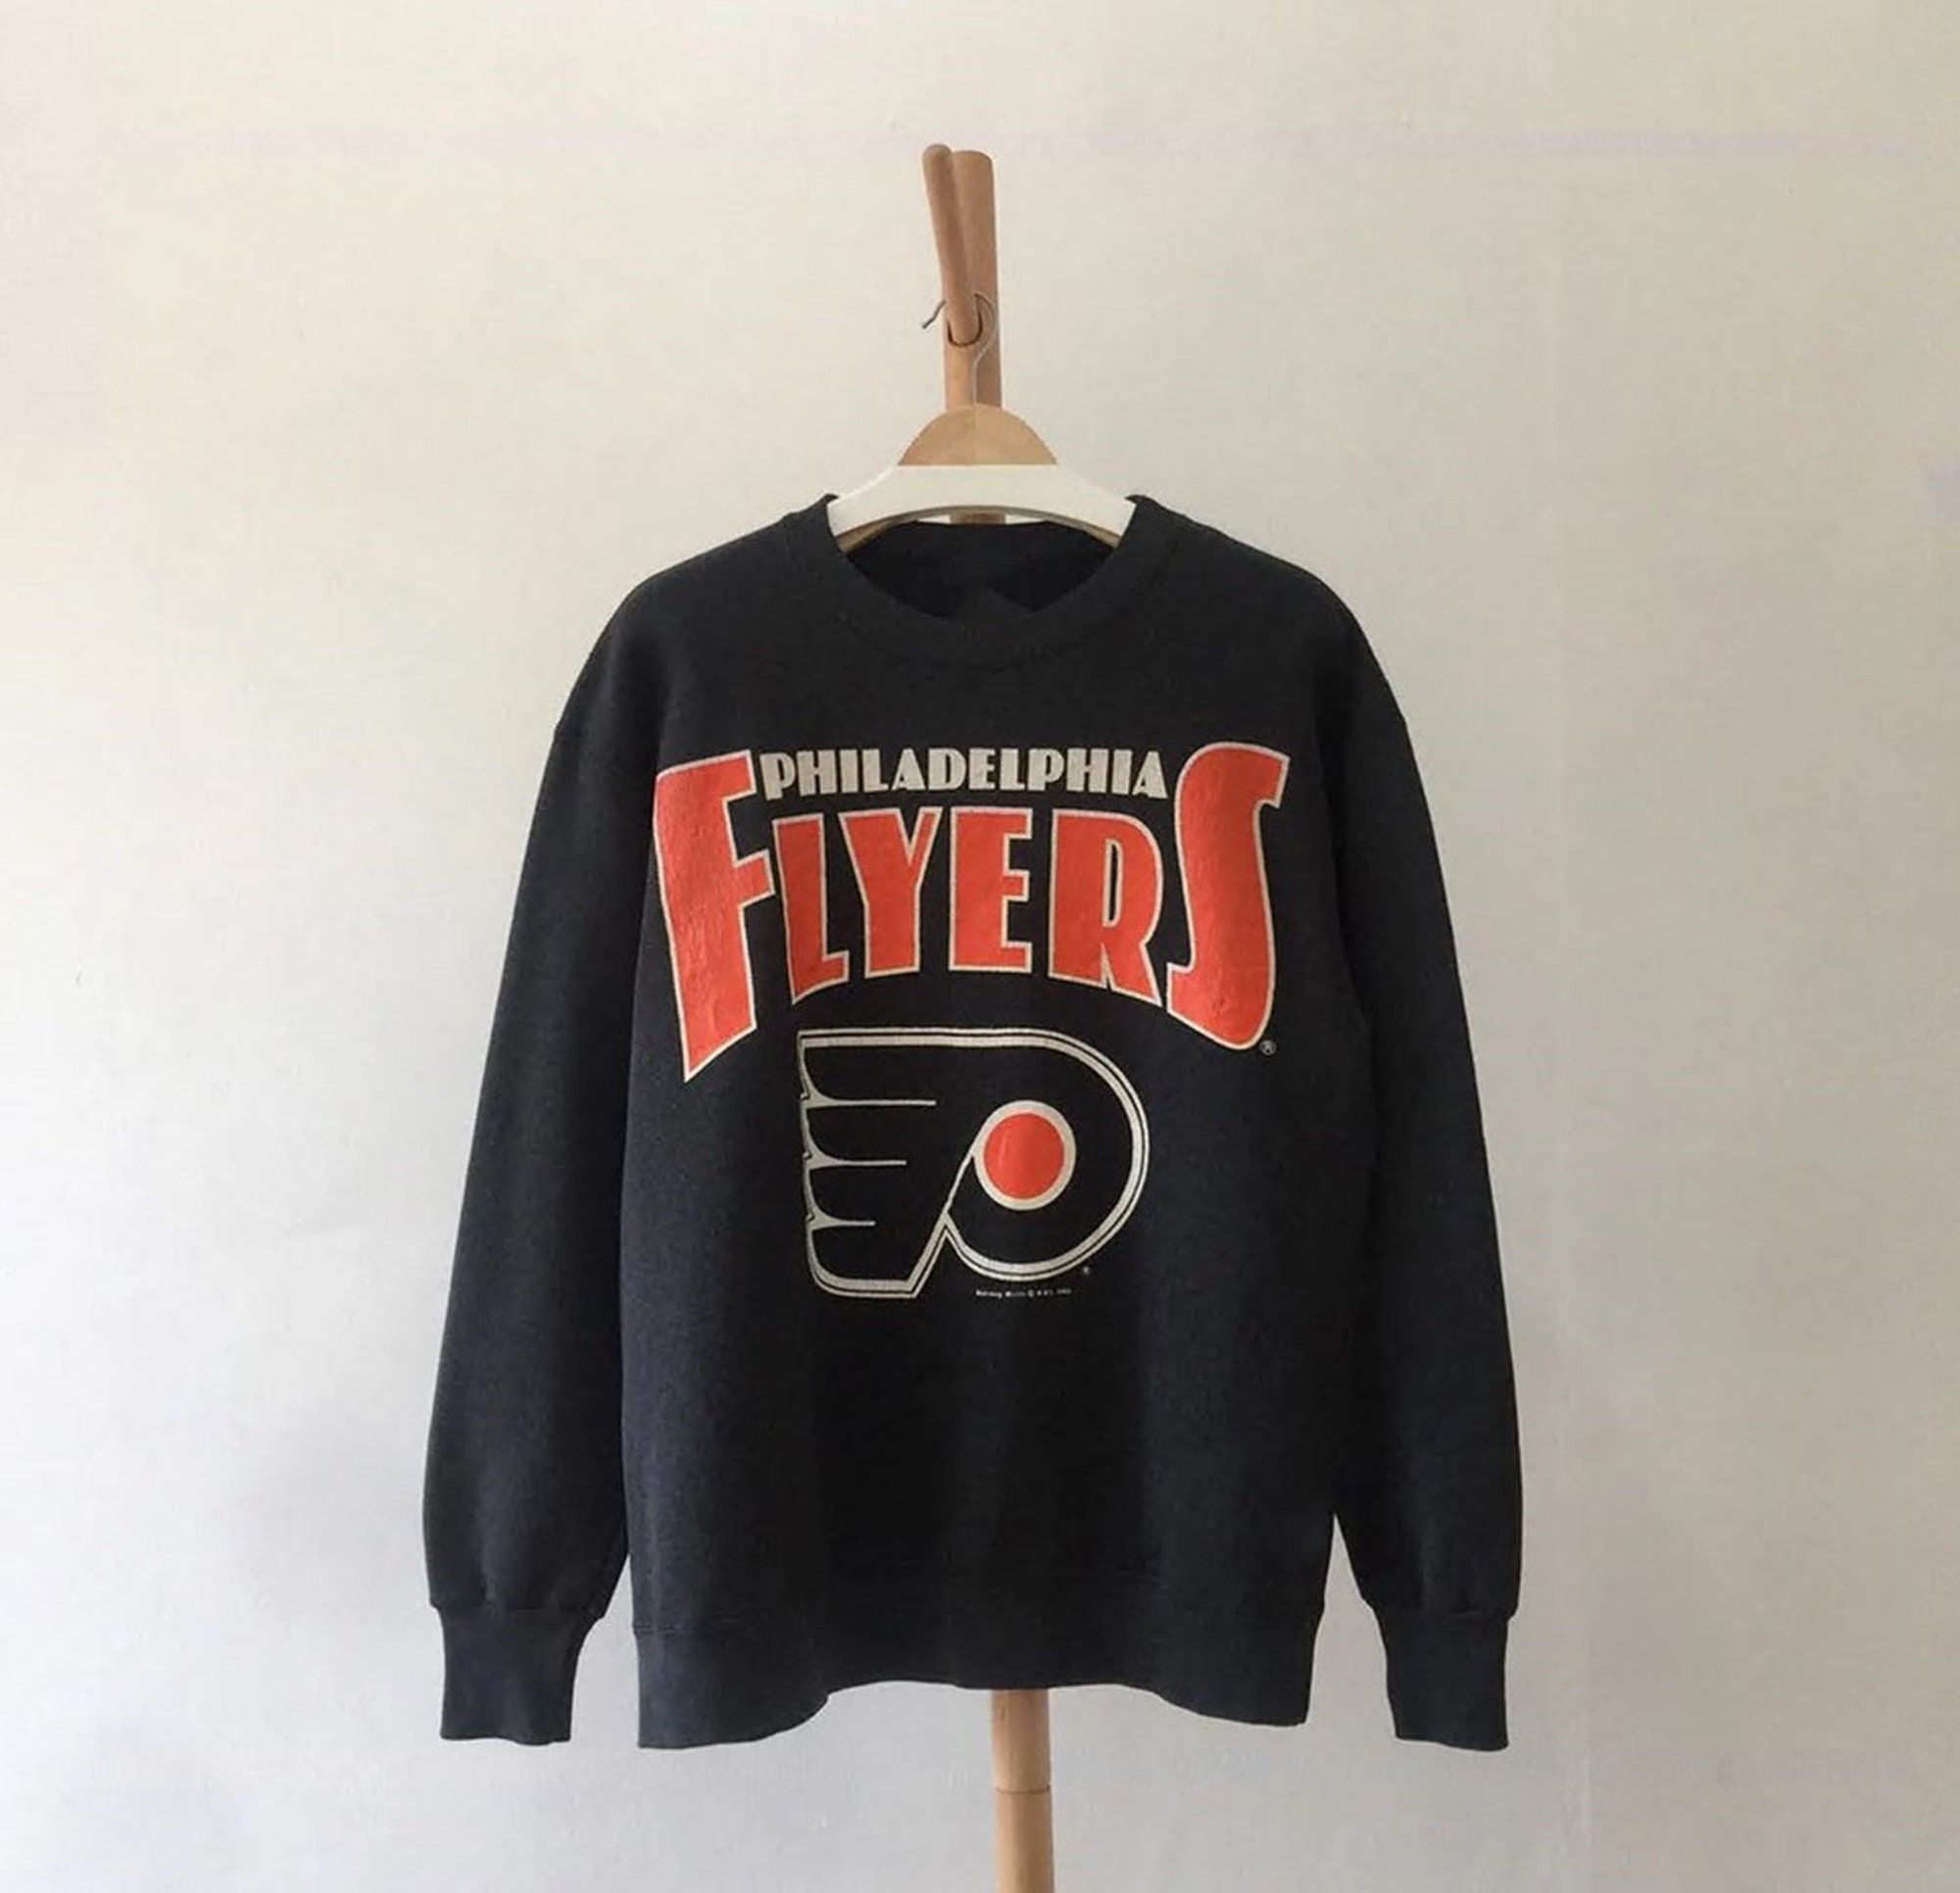 Customized Philadelphia Flyers Tee Shirts 3D Swoon-worthy Artwork Gift -  Personalized Gifts: Family, Sports, Occasions, Trending